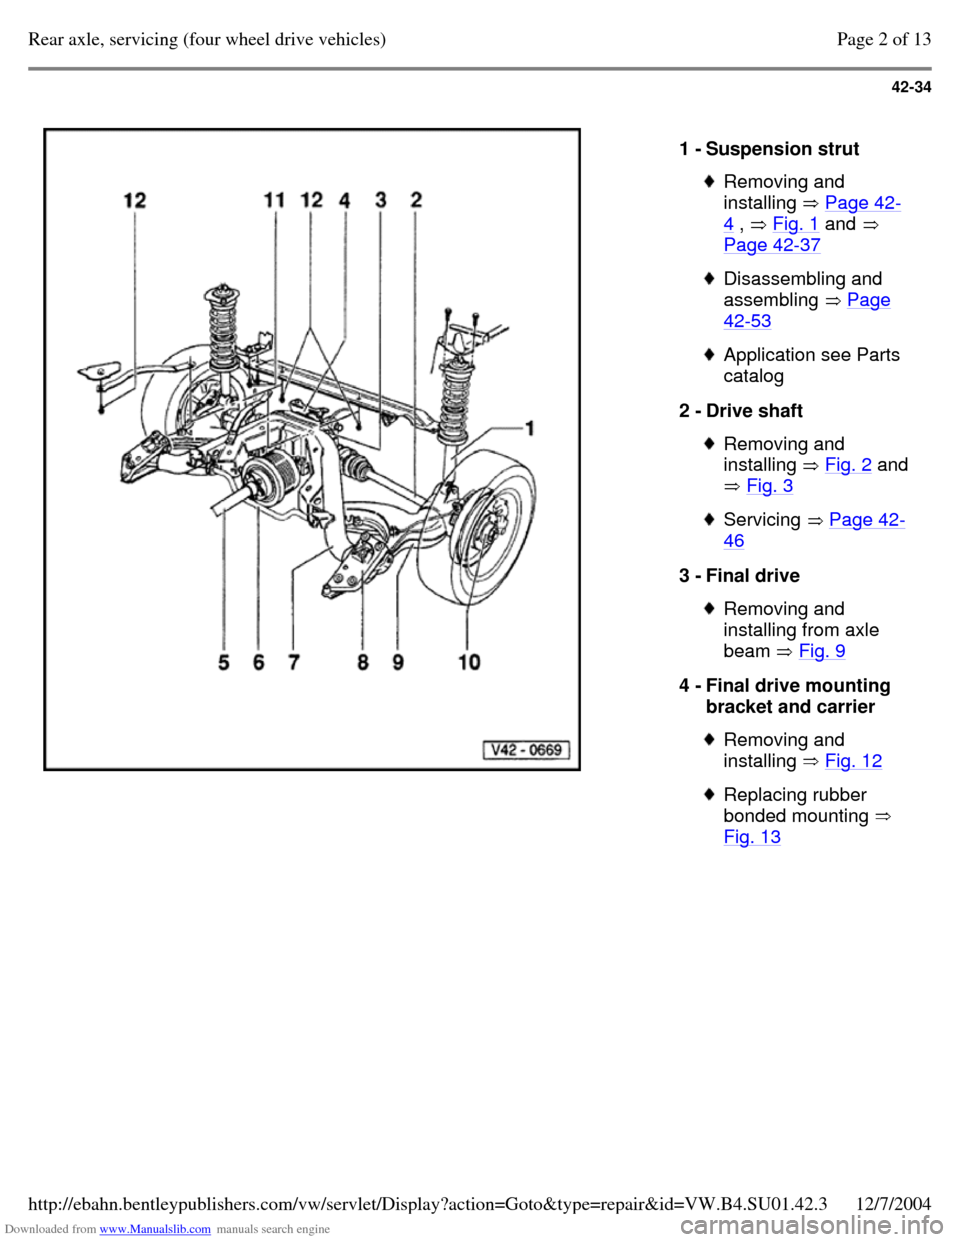 VOLKSWAGEN PASSAT 1997 B3, B4 / 3.G Service Workshop Manual Downloaded from www.Manualslib.com manuals search engine 42-34
   
1 - Suspension strut  Removing and 
installing  Page 42-4 ,  Fig. 1 and  
Page 42-37  Disassembling and 
assembling  Page 42-53  Appl